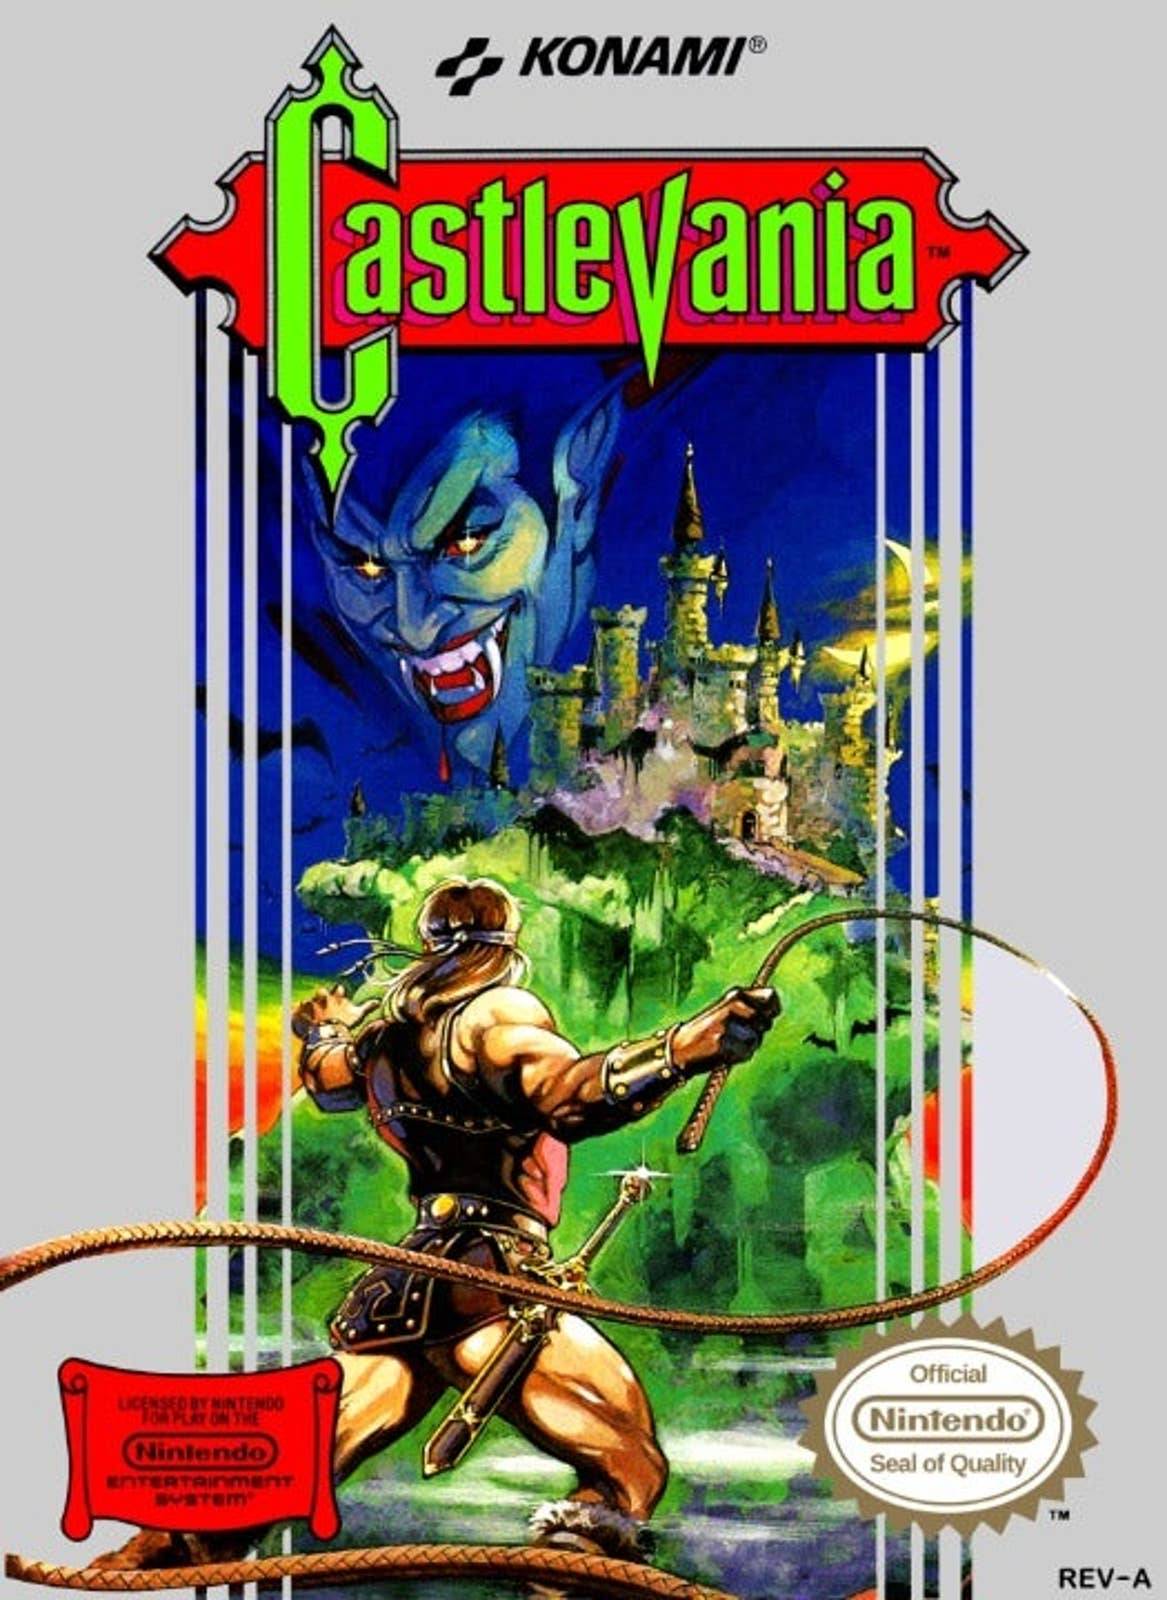 36" x 60" Castlevania Tapestry Wall Hanging Décor